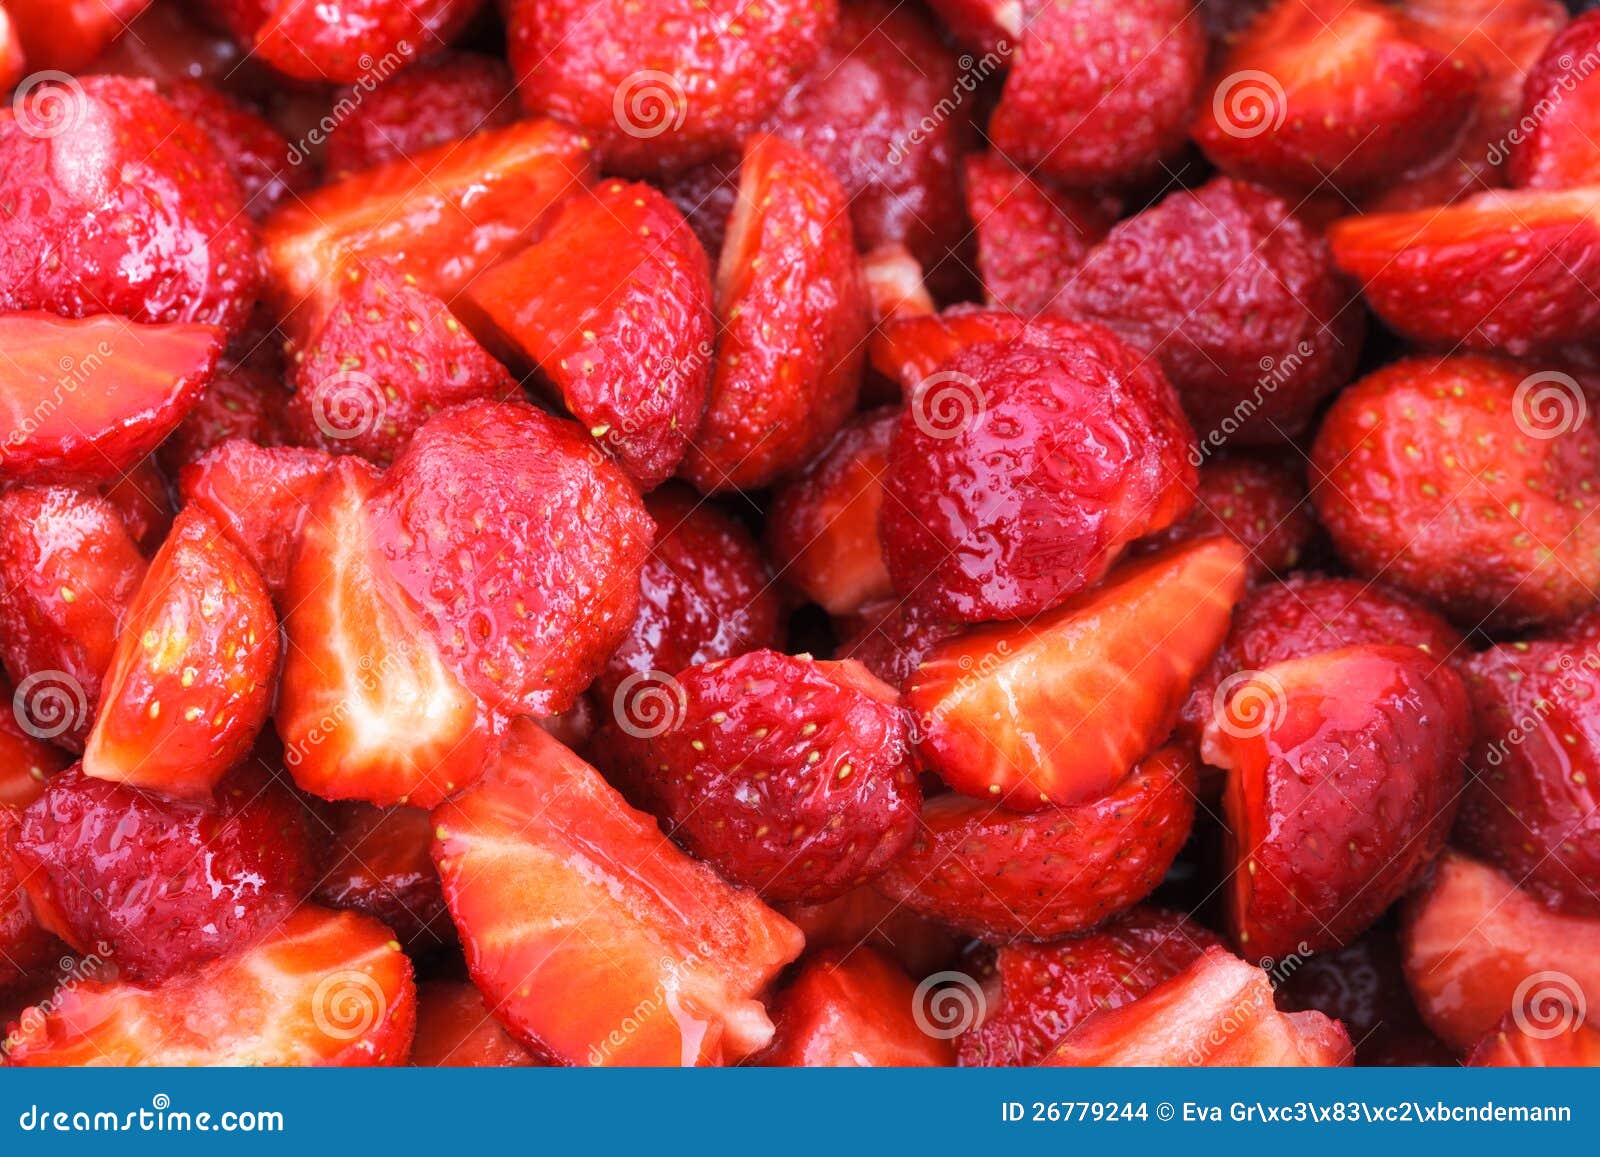 Sugared strawberries stock photo. Image of eating, sweet - 26779244